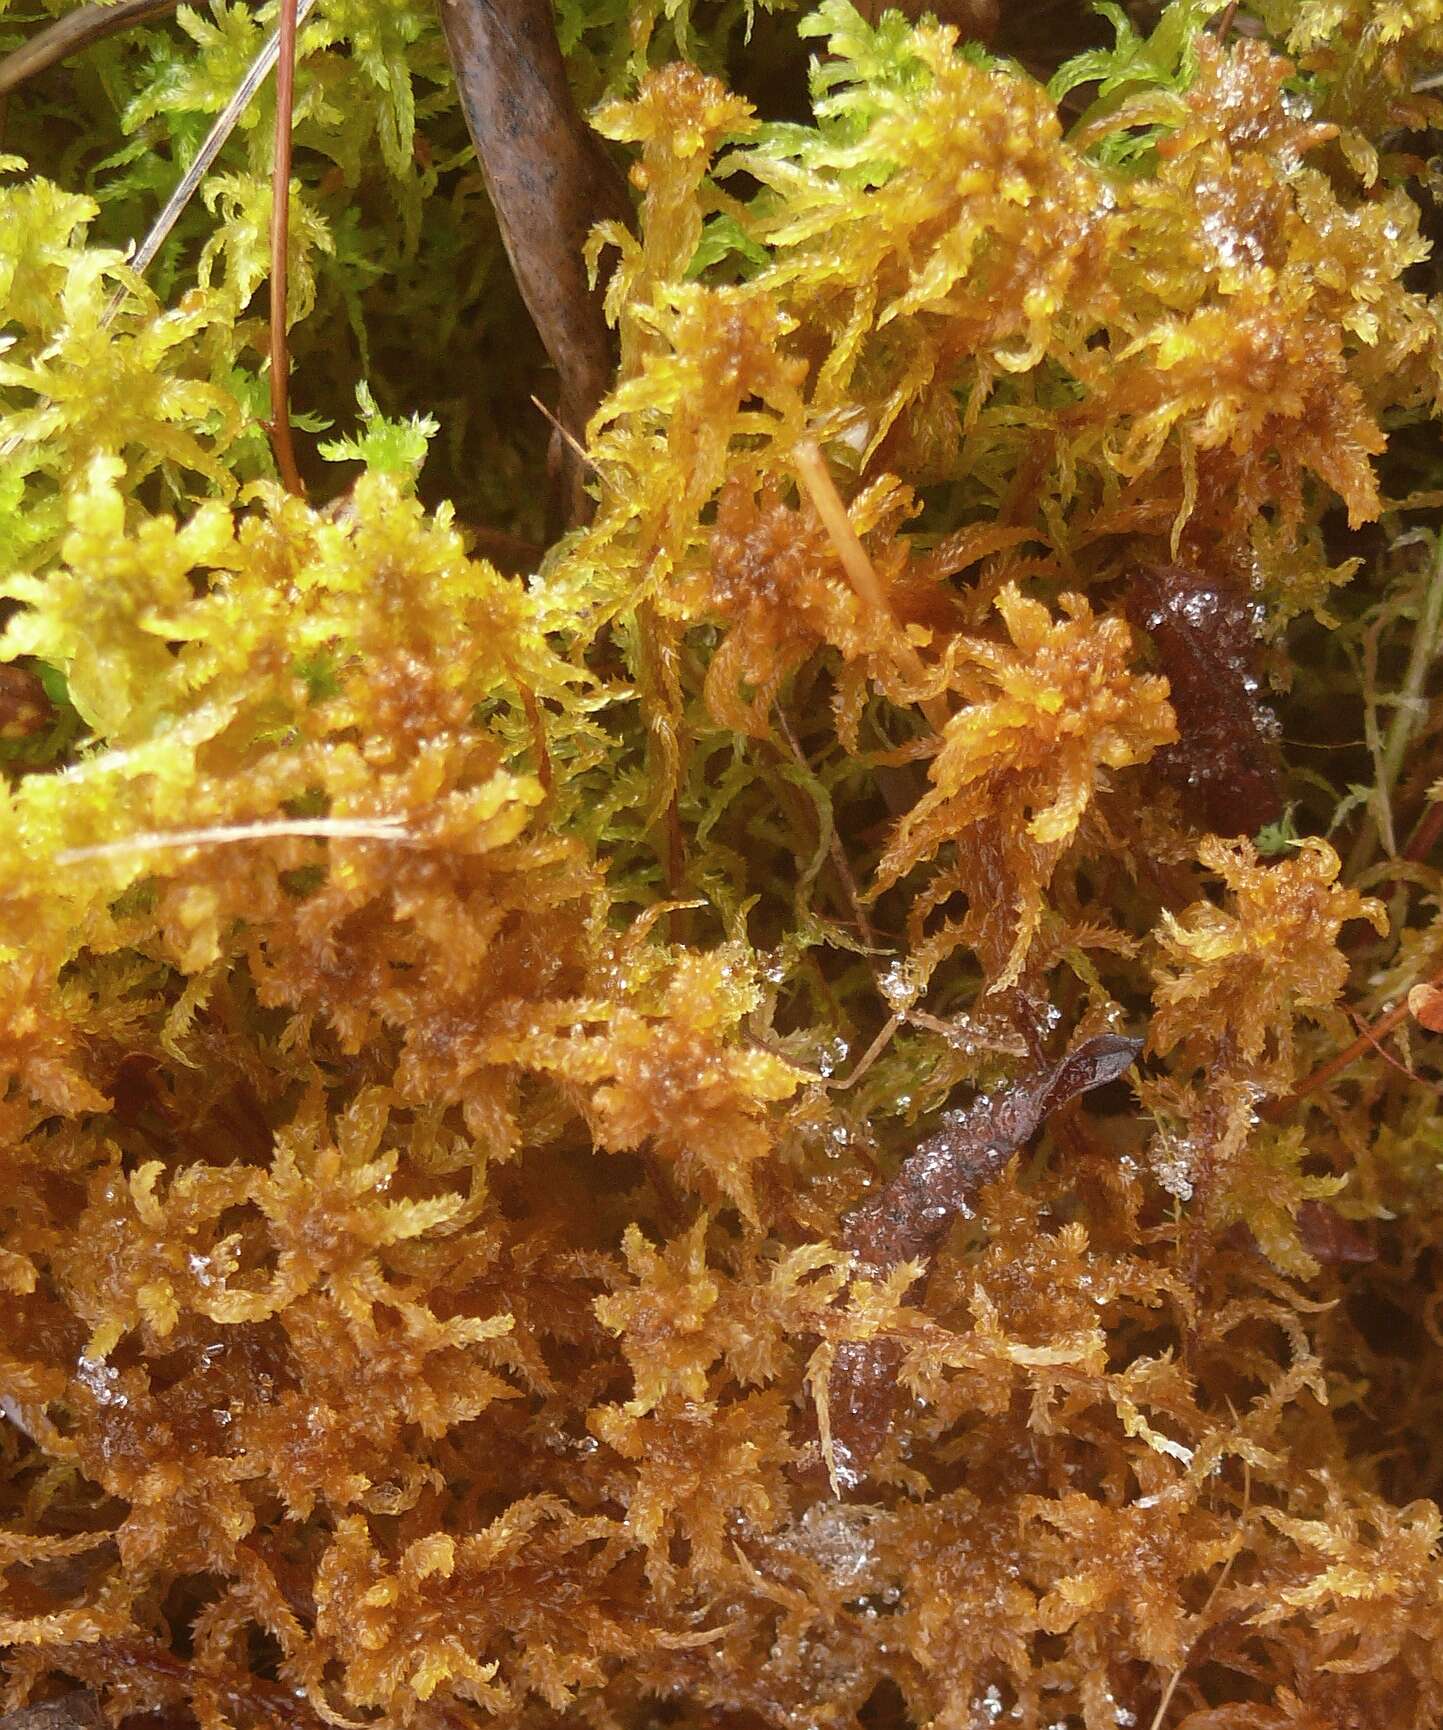 Image of Contorted sphagnum moss